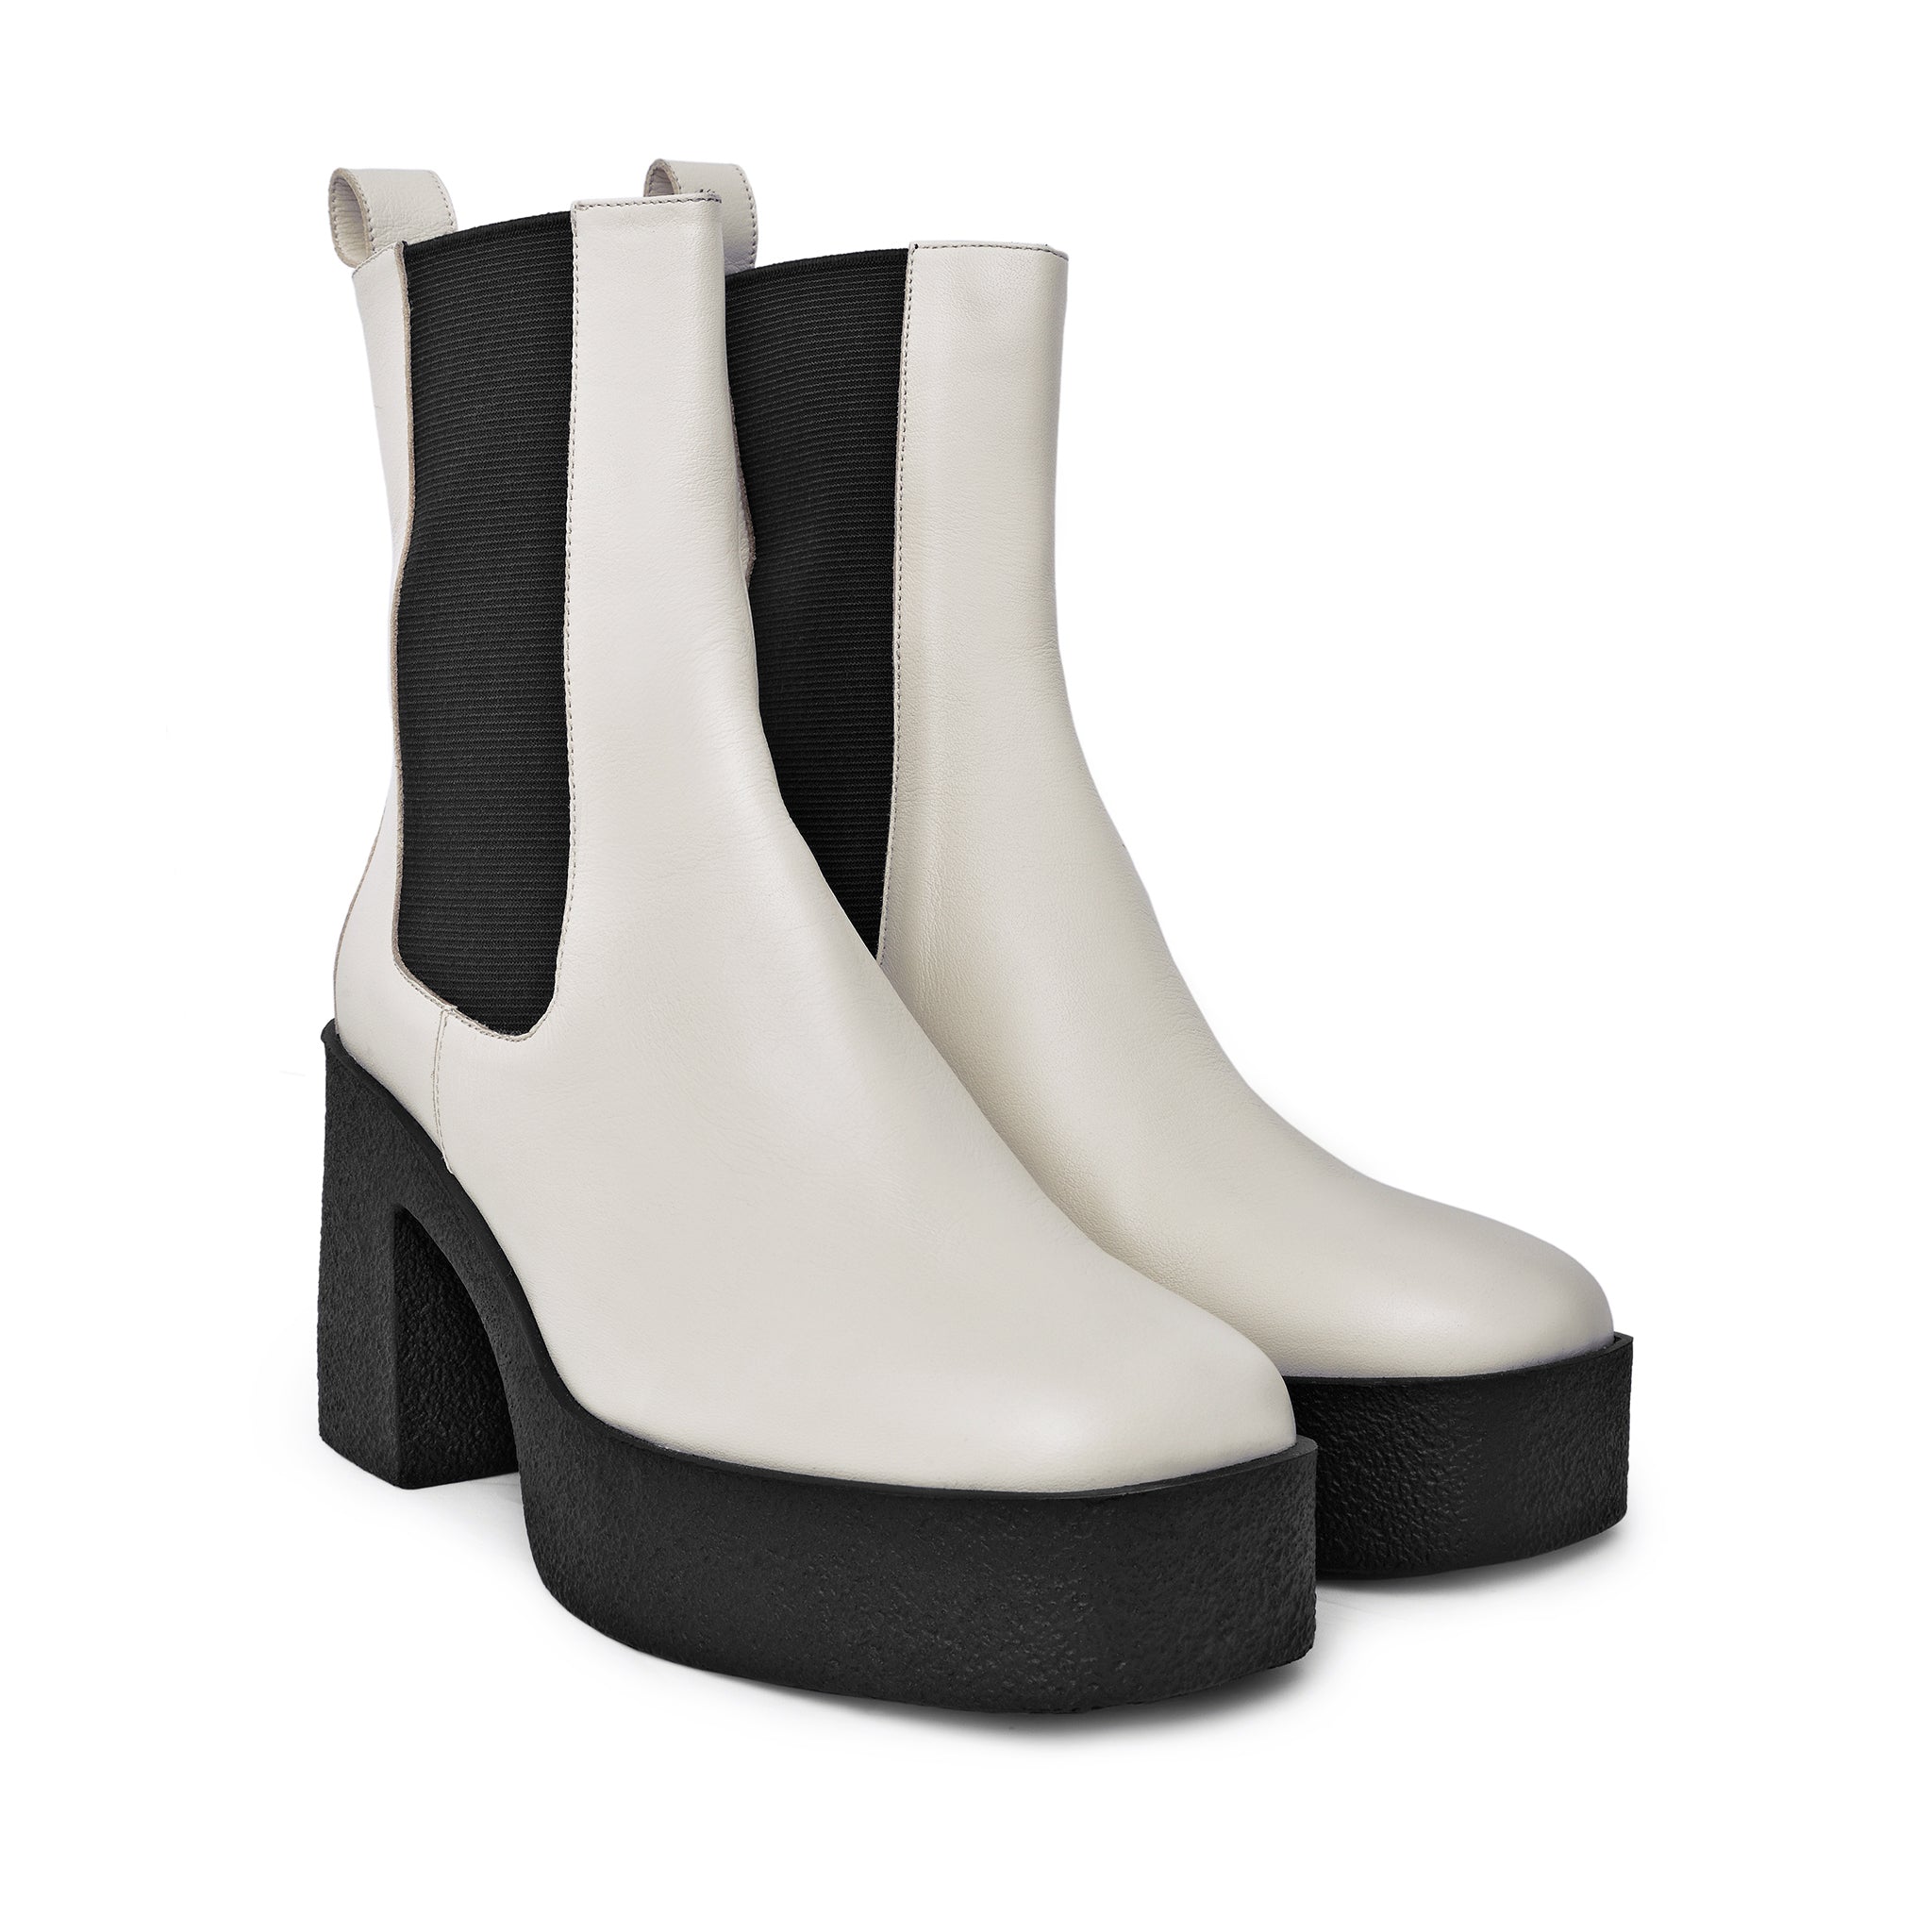 Momo Off White Leather Chelsea Boots 20077-04-02 - 12